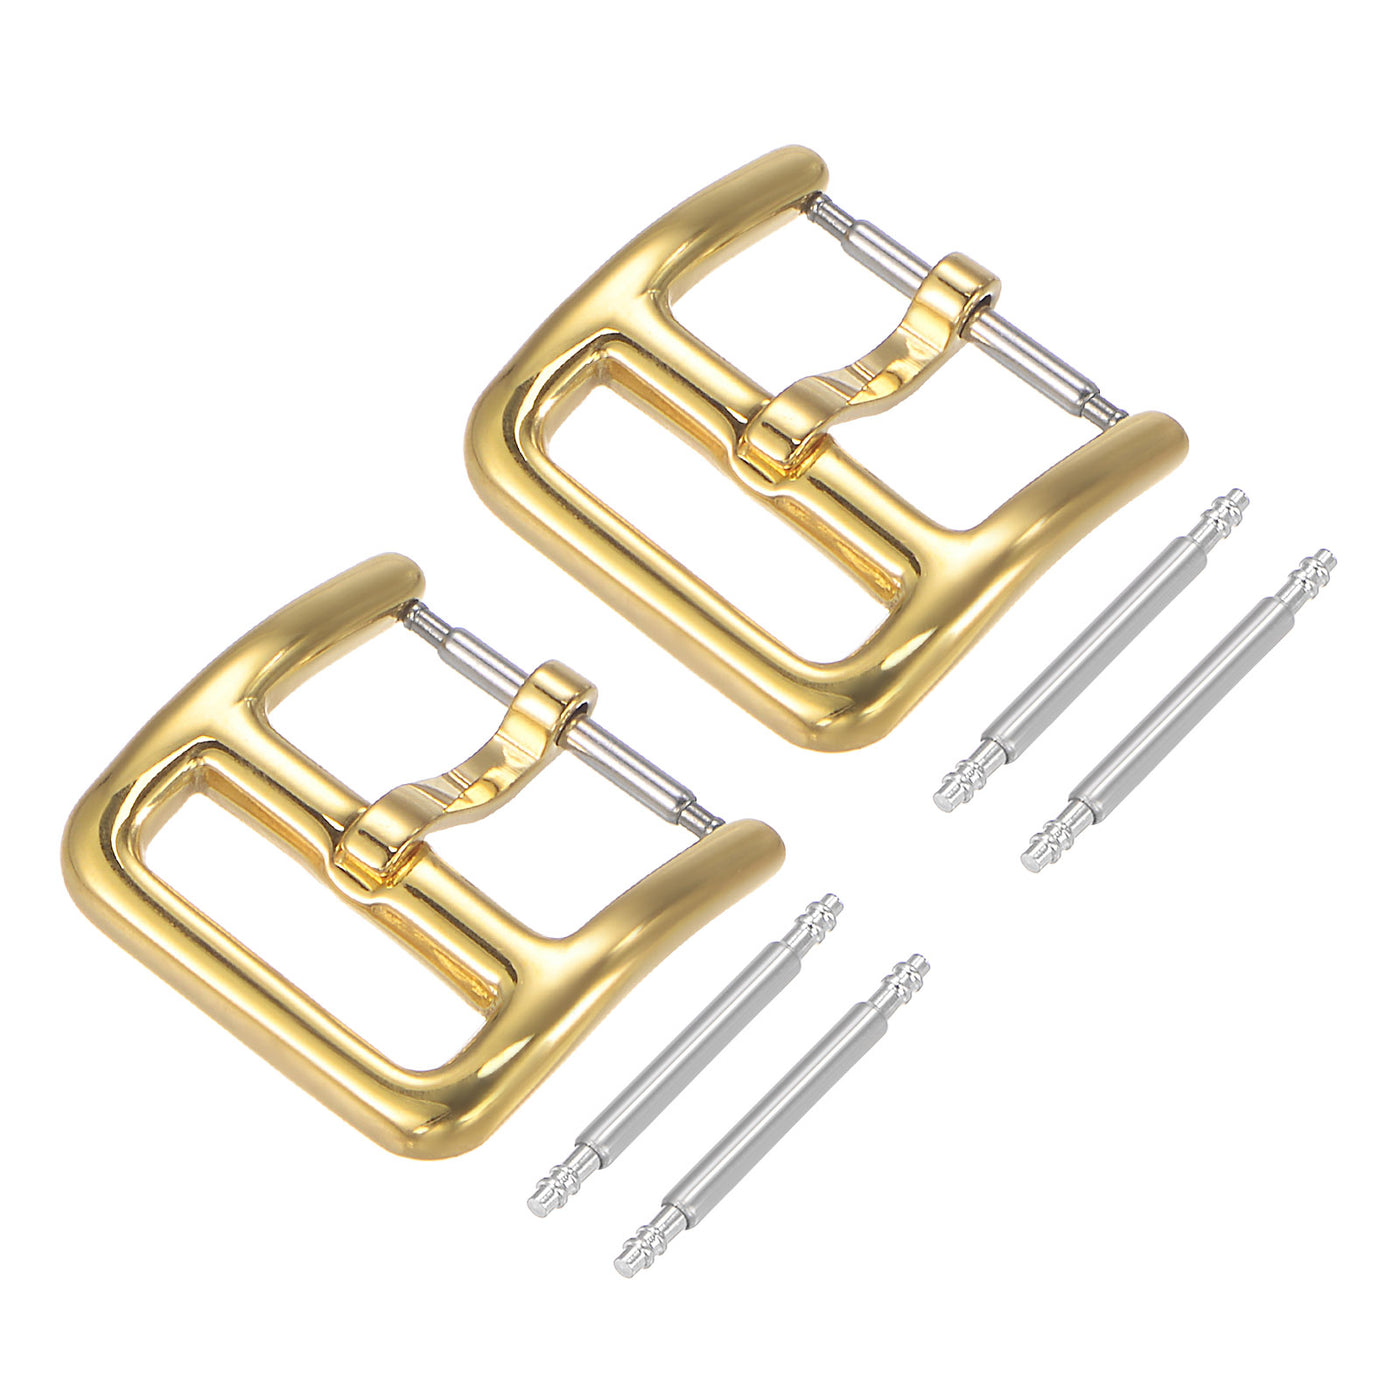 Uxcell Uxcell Watch SUS304 2 Pcs Gold Tone Buckle for 18mm Watch Bands with 4Pcs Spring Bar